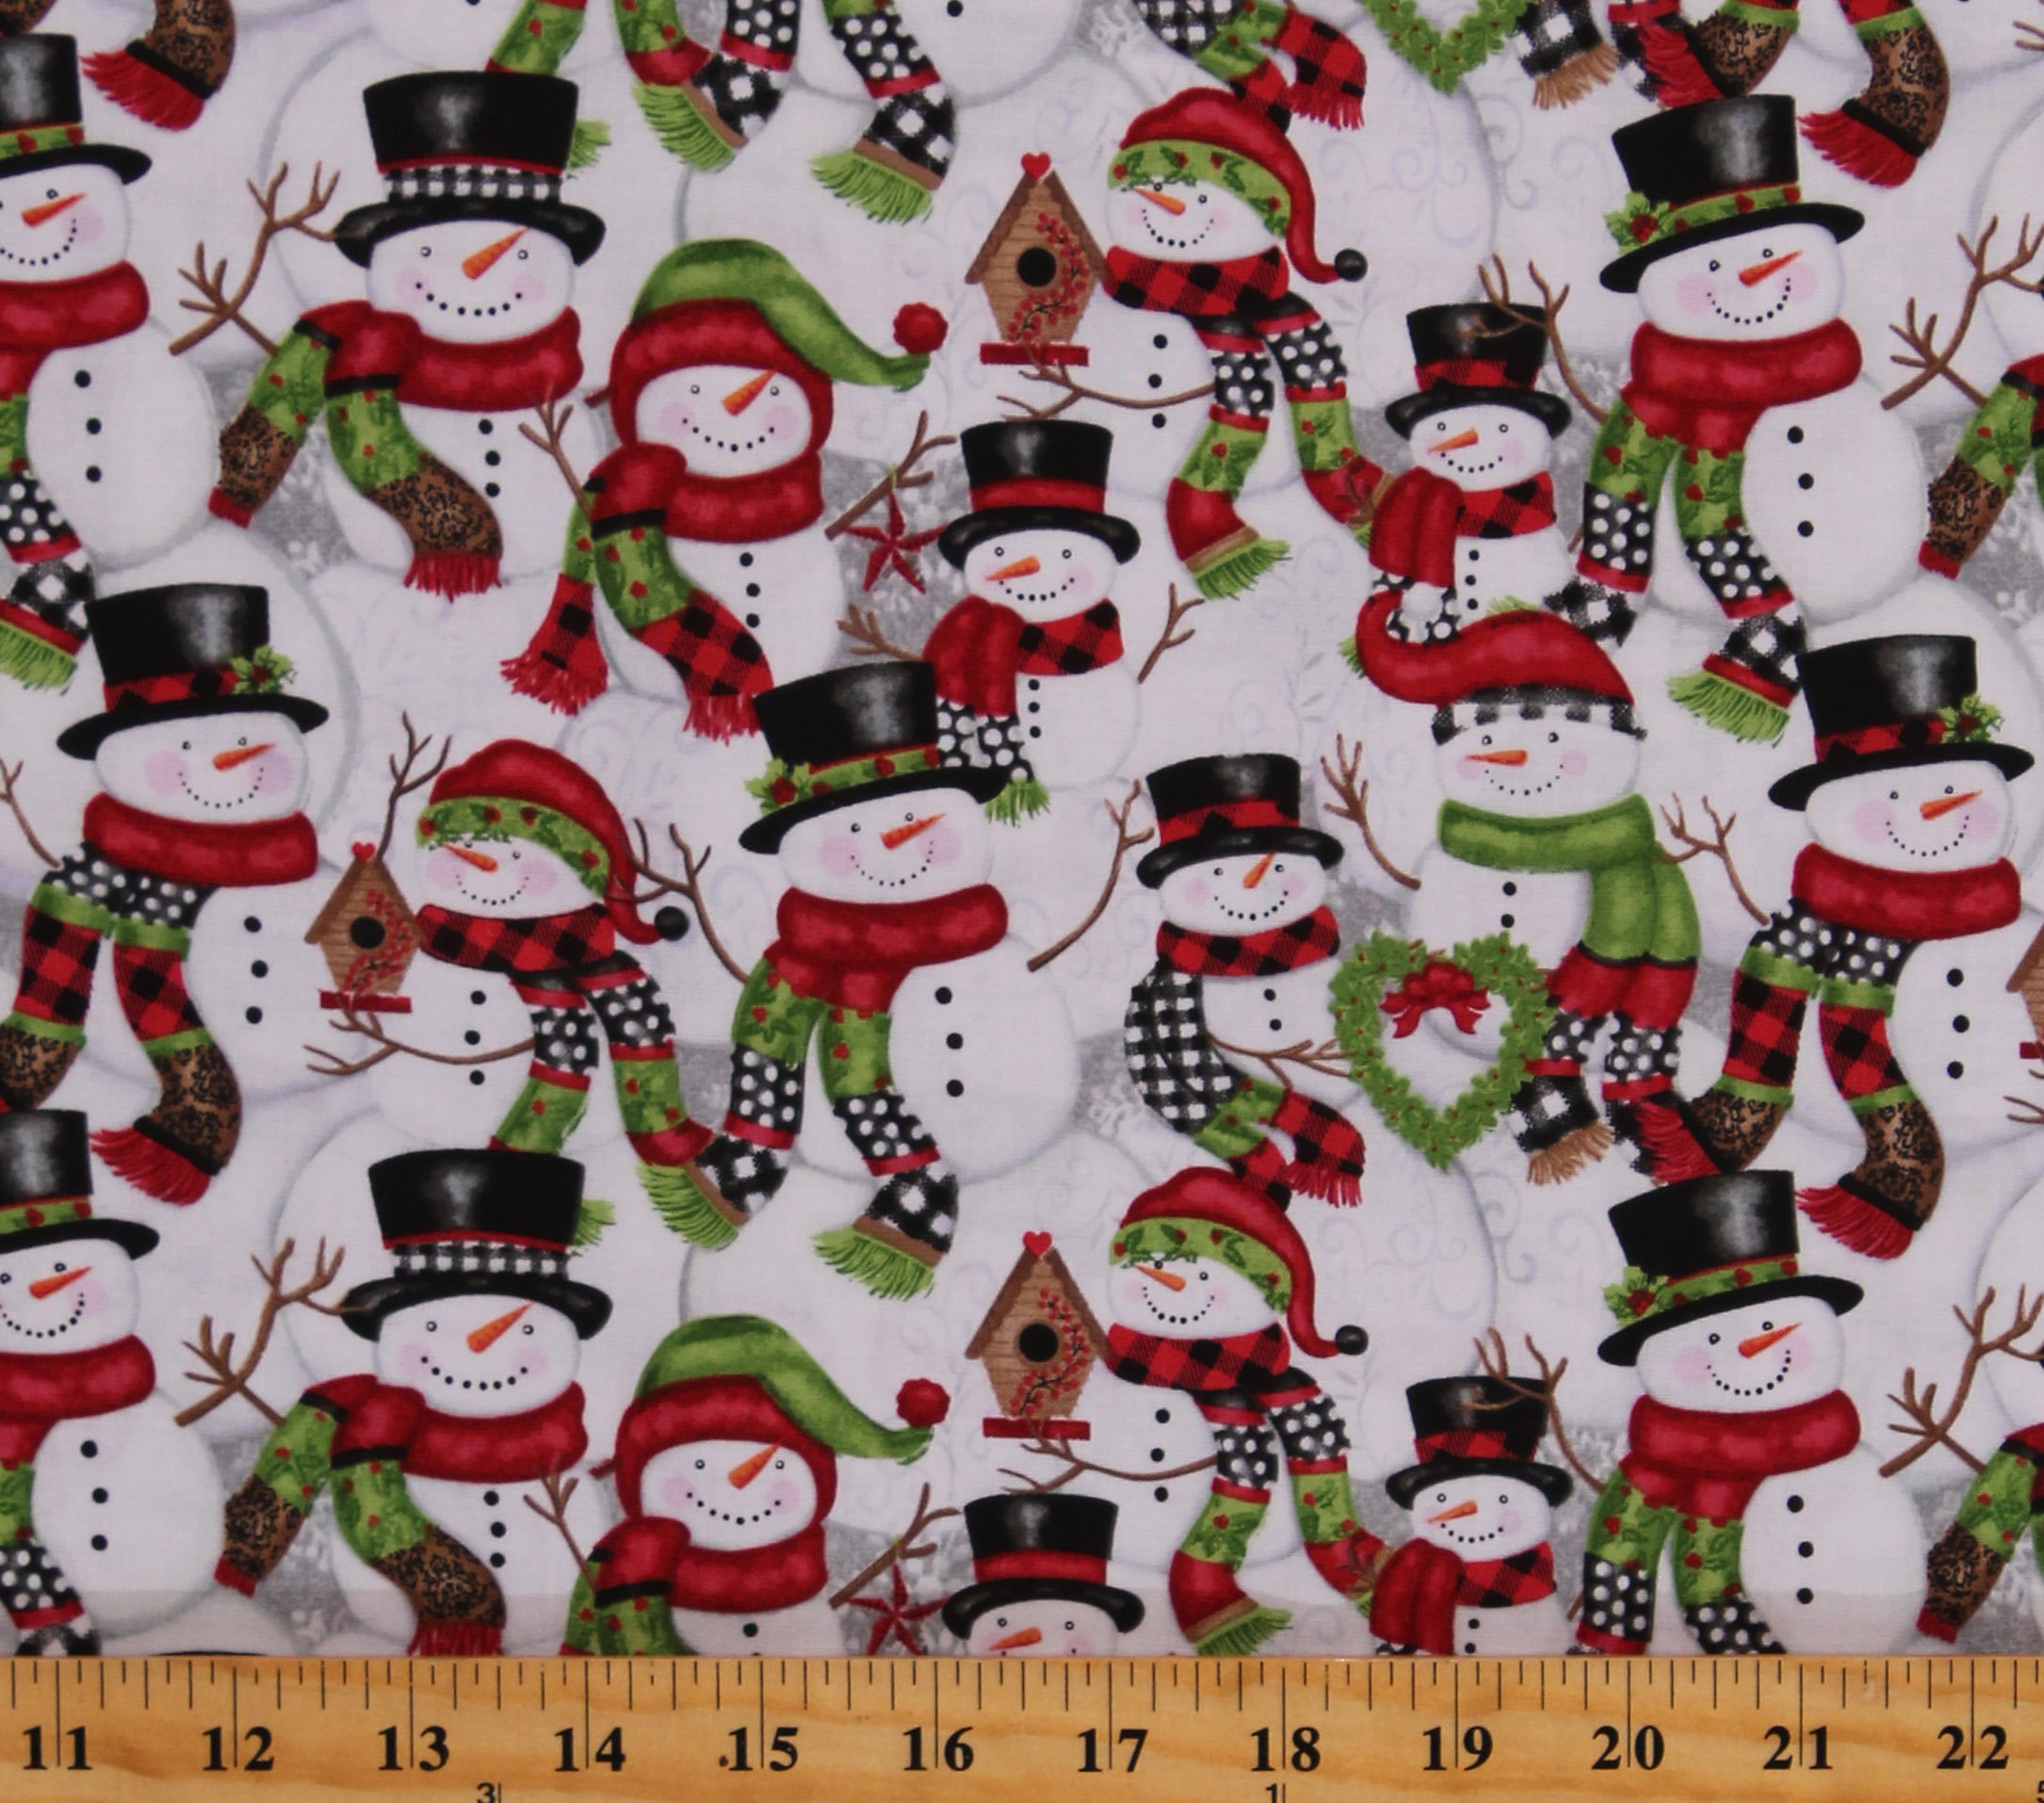 Snow Flurries Snowman Sampler Christmas Fabric by the 1/2 Yard   #Y0484-29